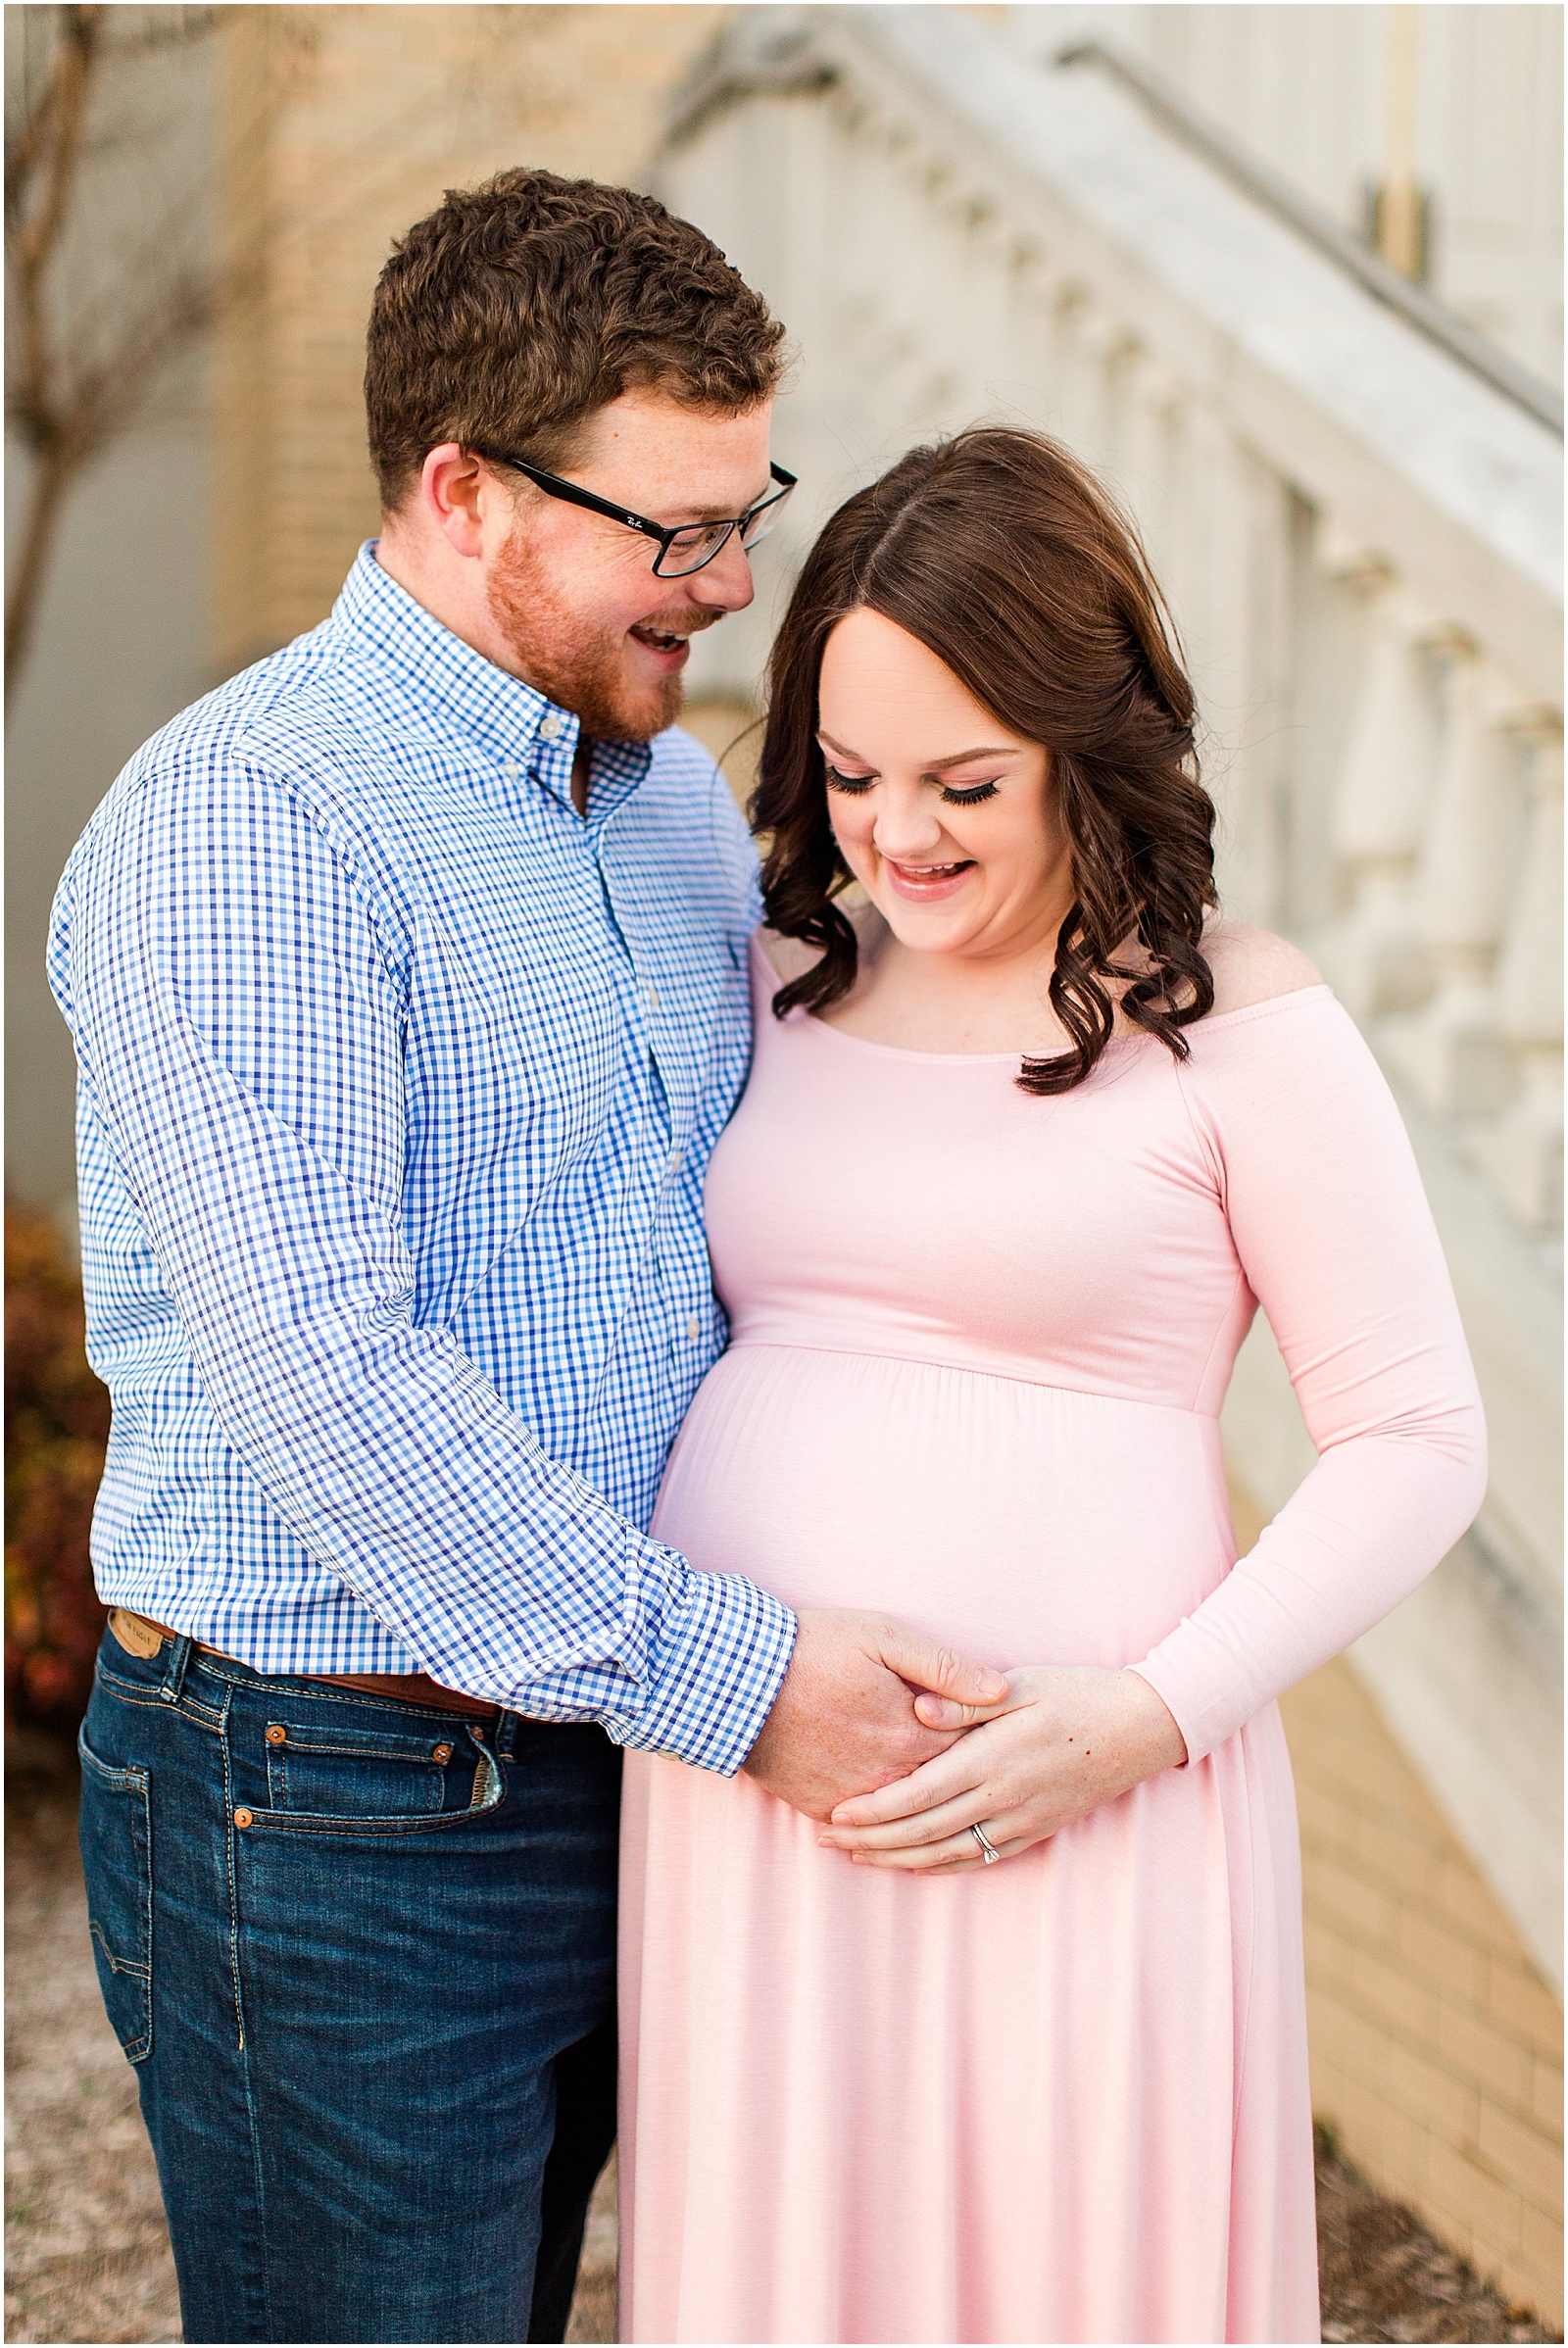 A Downtown Owensboro Maternity Session | Kayla and Grant Evansville Indiana Wedding Photographers-0024.jpg